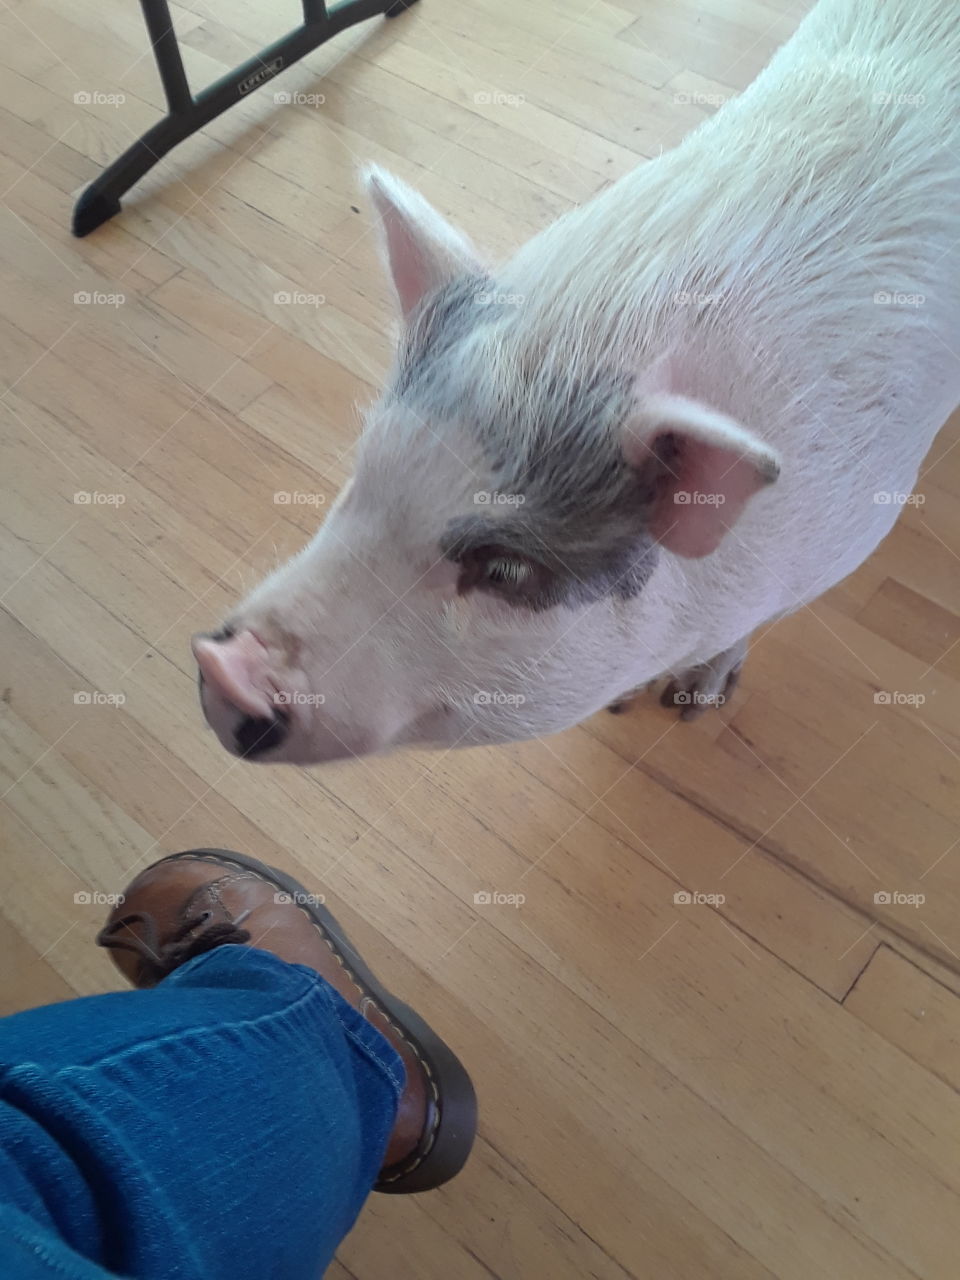 pot belly pig named Petunia on Thanksgiving day hanging out with a girl wearing Doc Martin boots